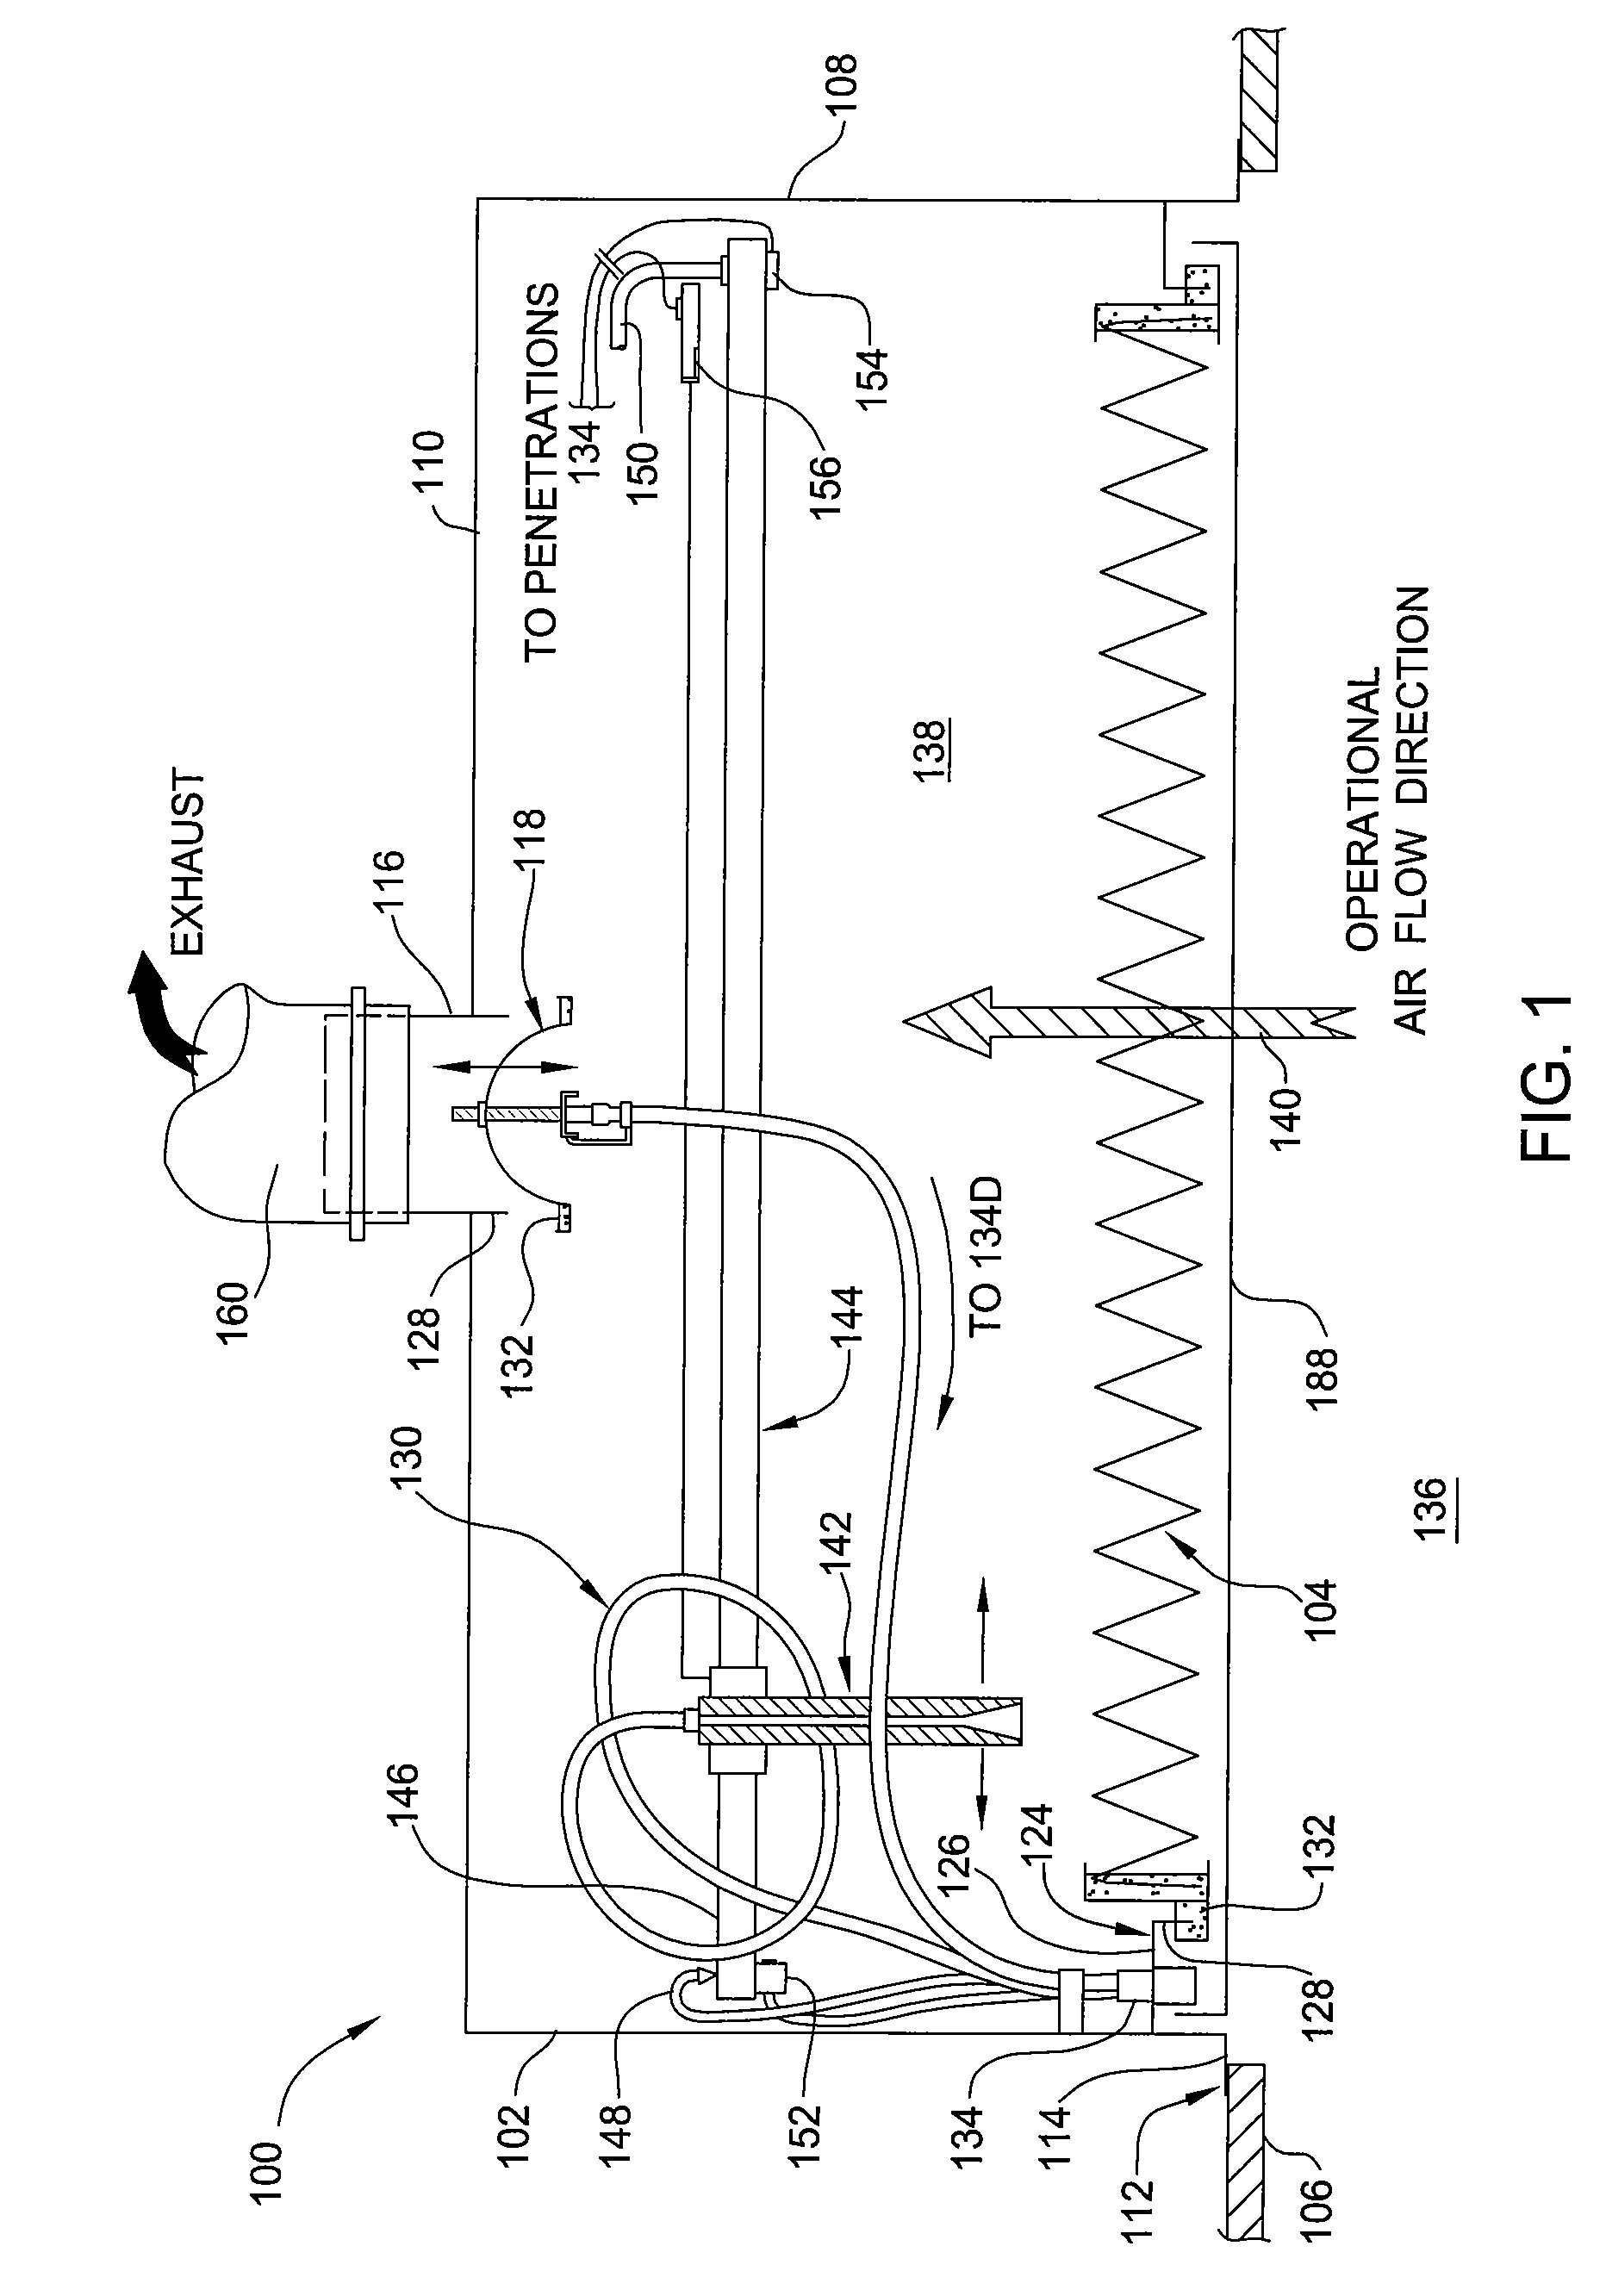 Exhaust filter module with mechanically positionable scan probe